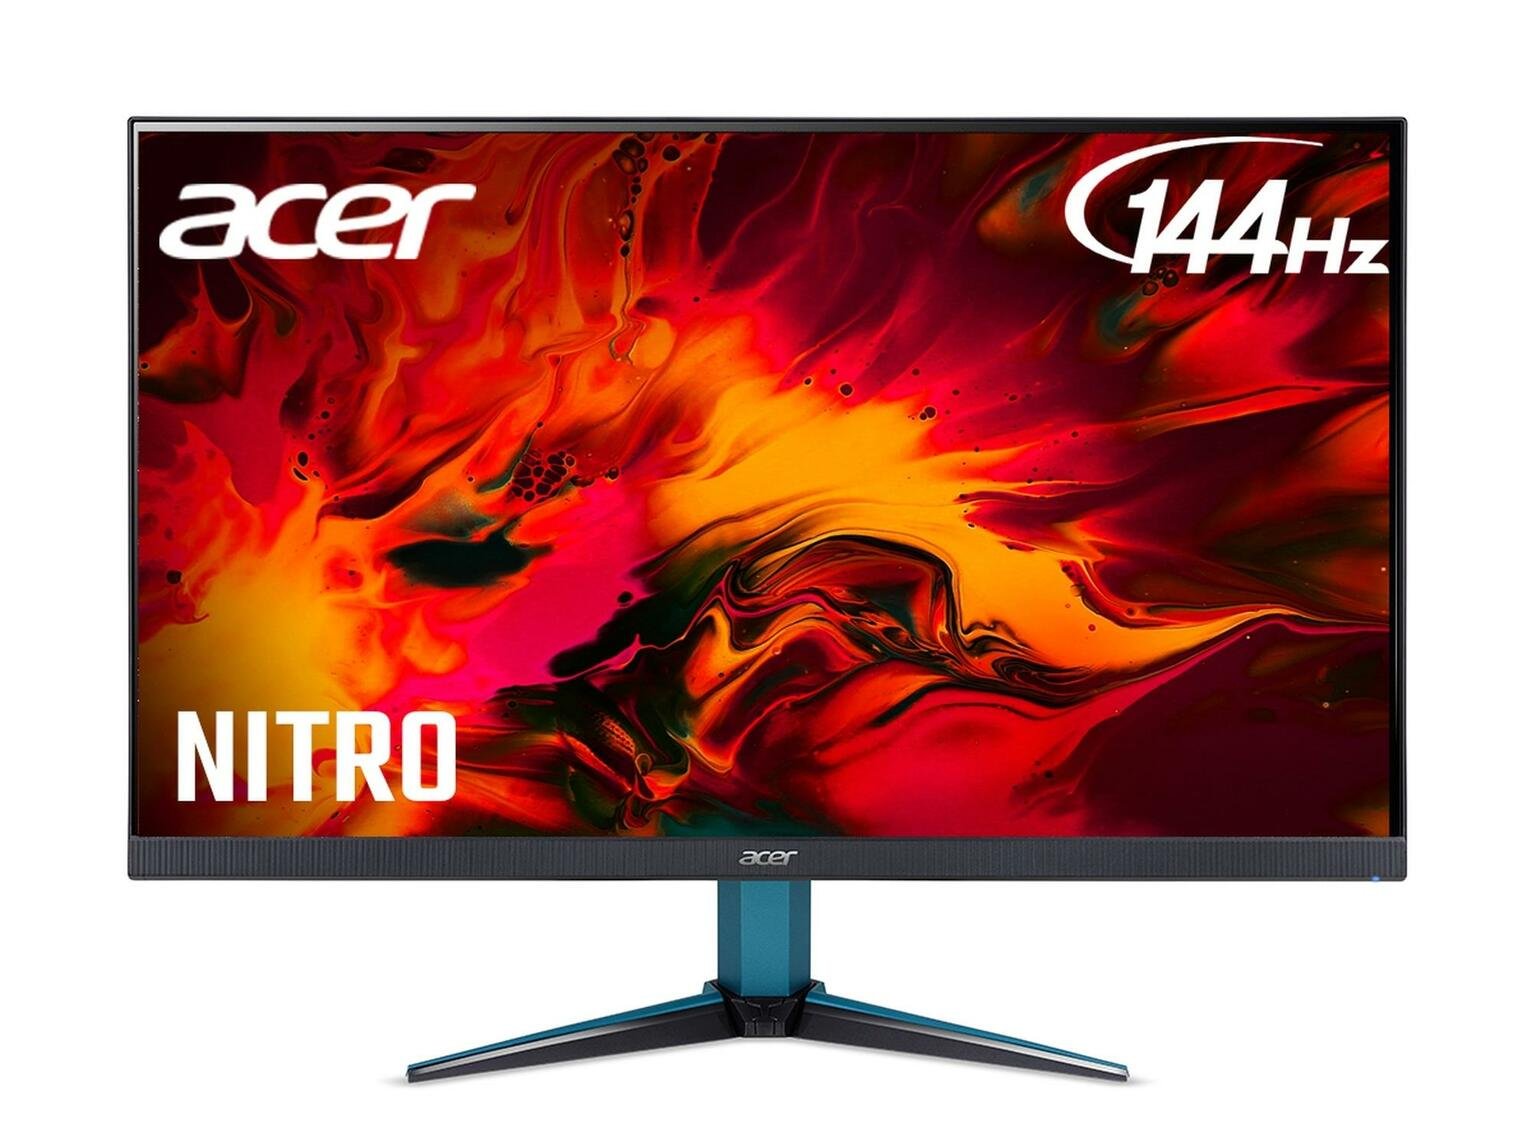 Acer VG270UP 27in 144Hz IPS WQHD Gaming Monitor Review